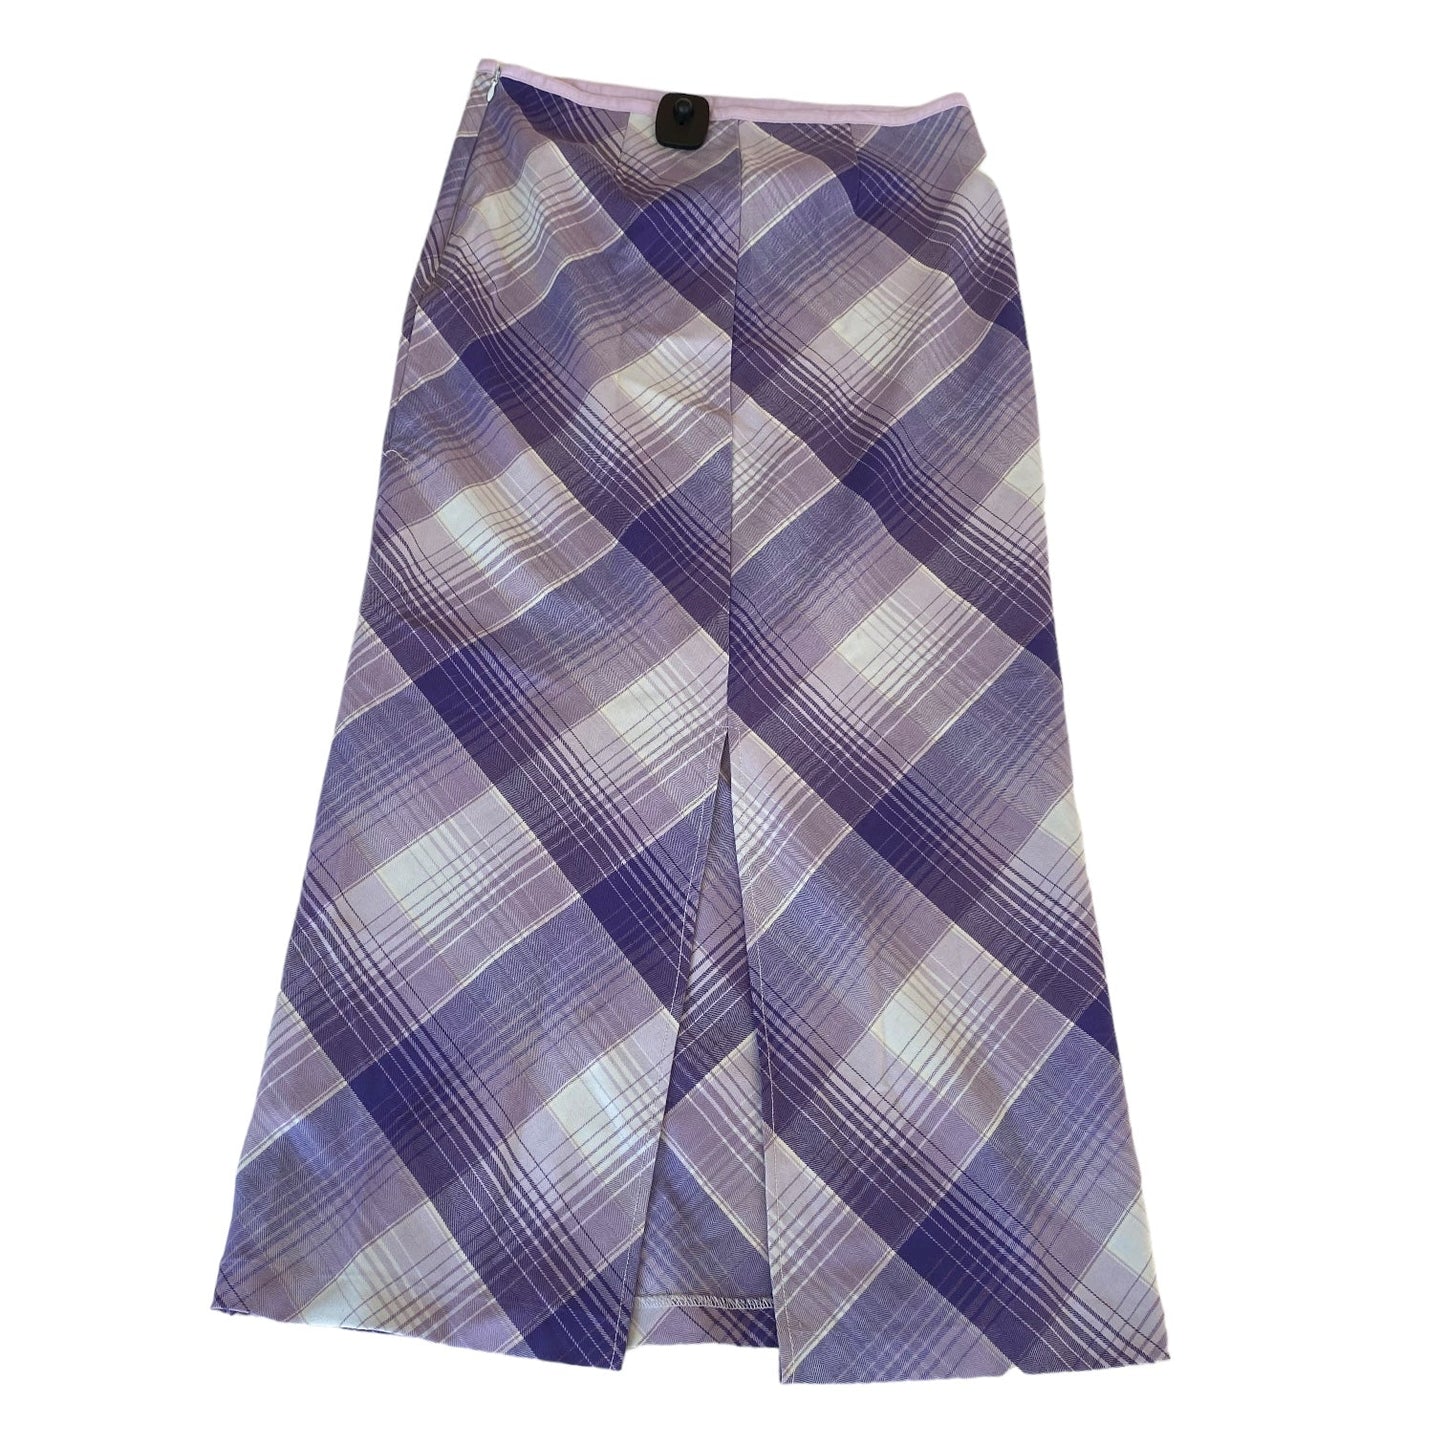 Plaid Pattern Skirt Maxi Urban Outfitters, Size M